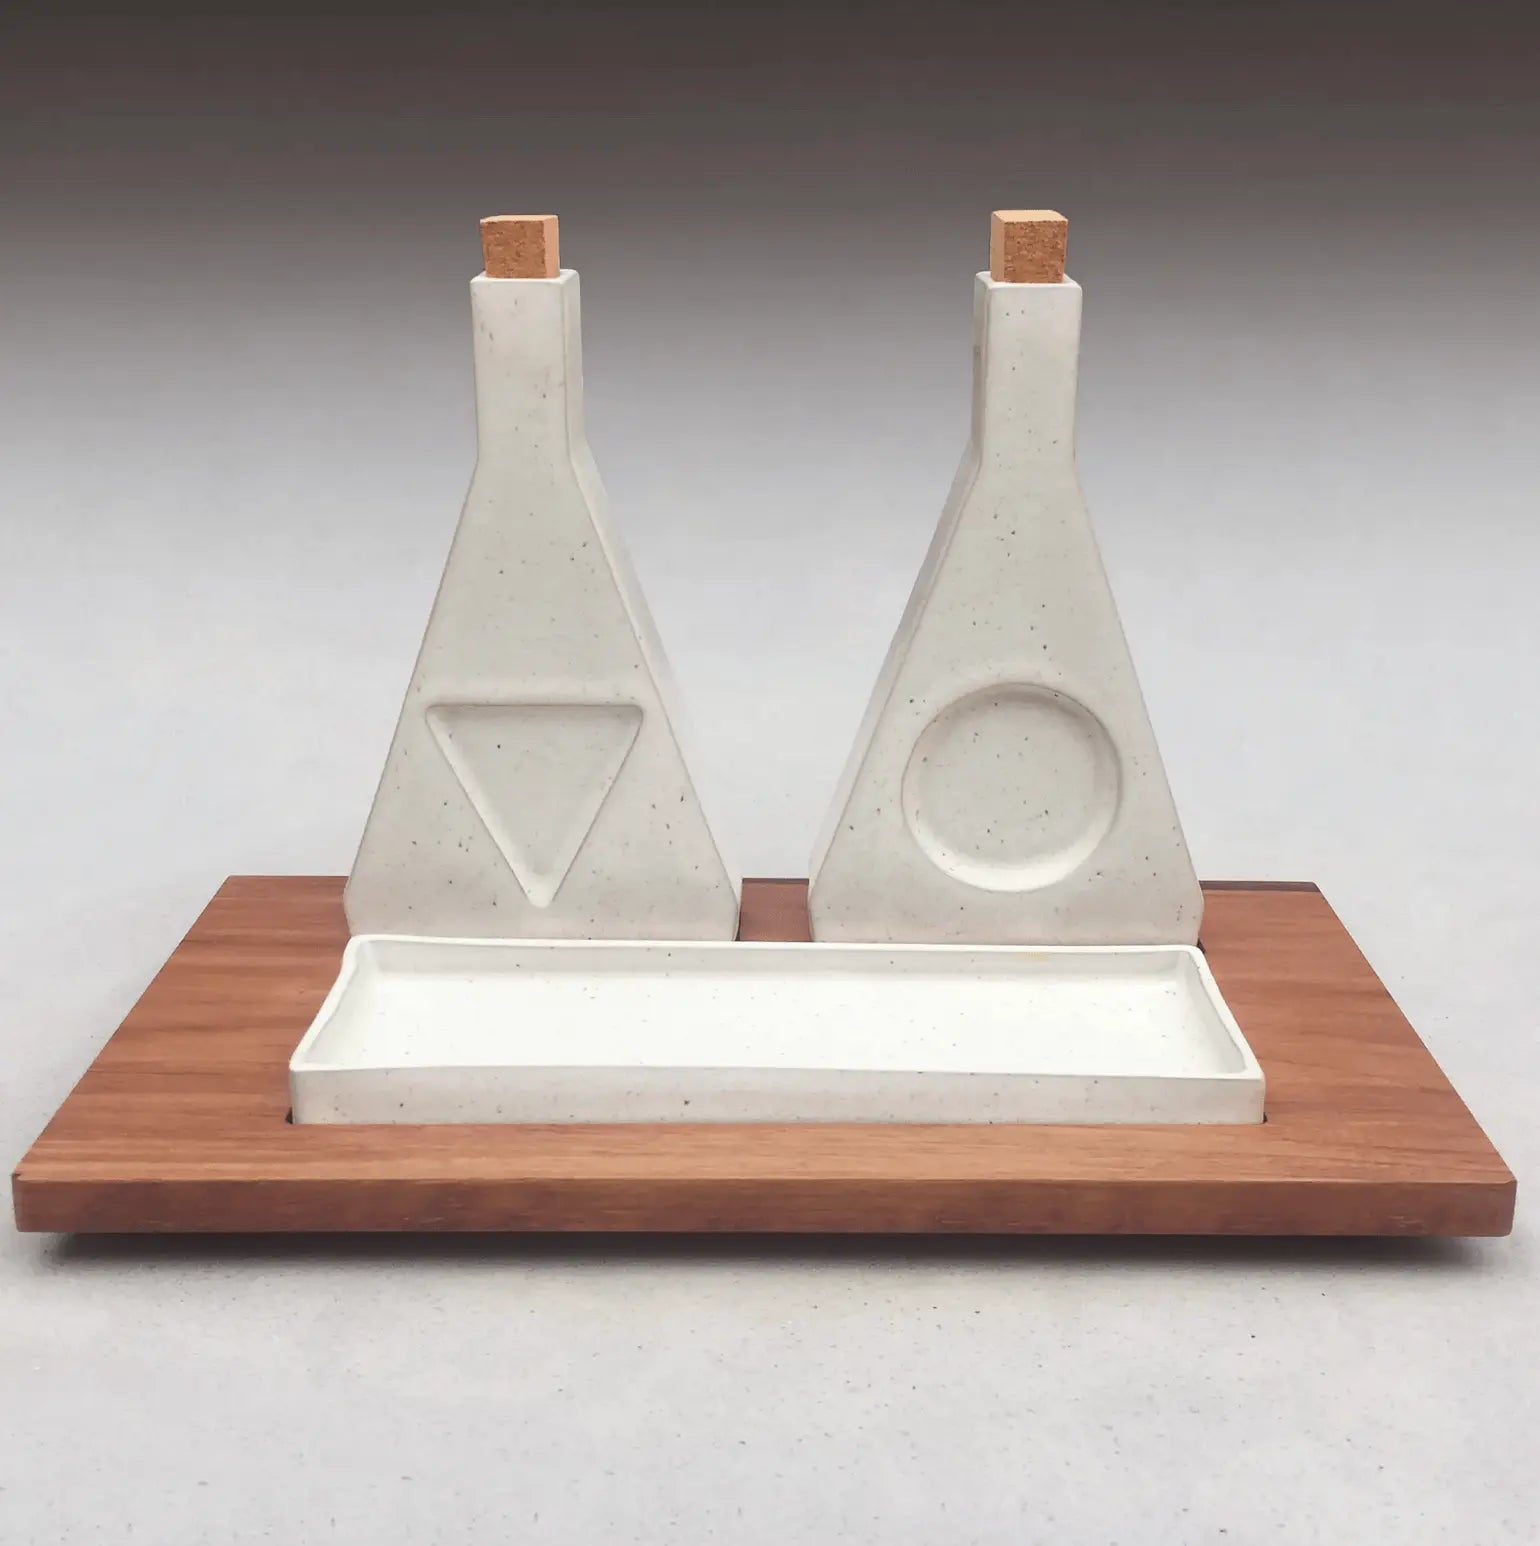 Oil & Vinegar set with Dipping Tray - Pop of Modern